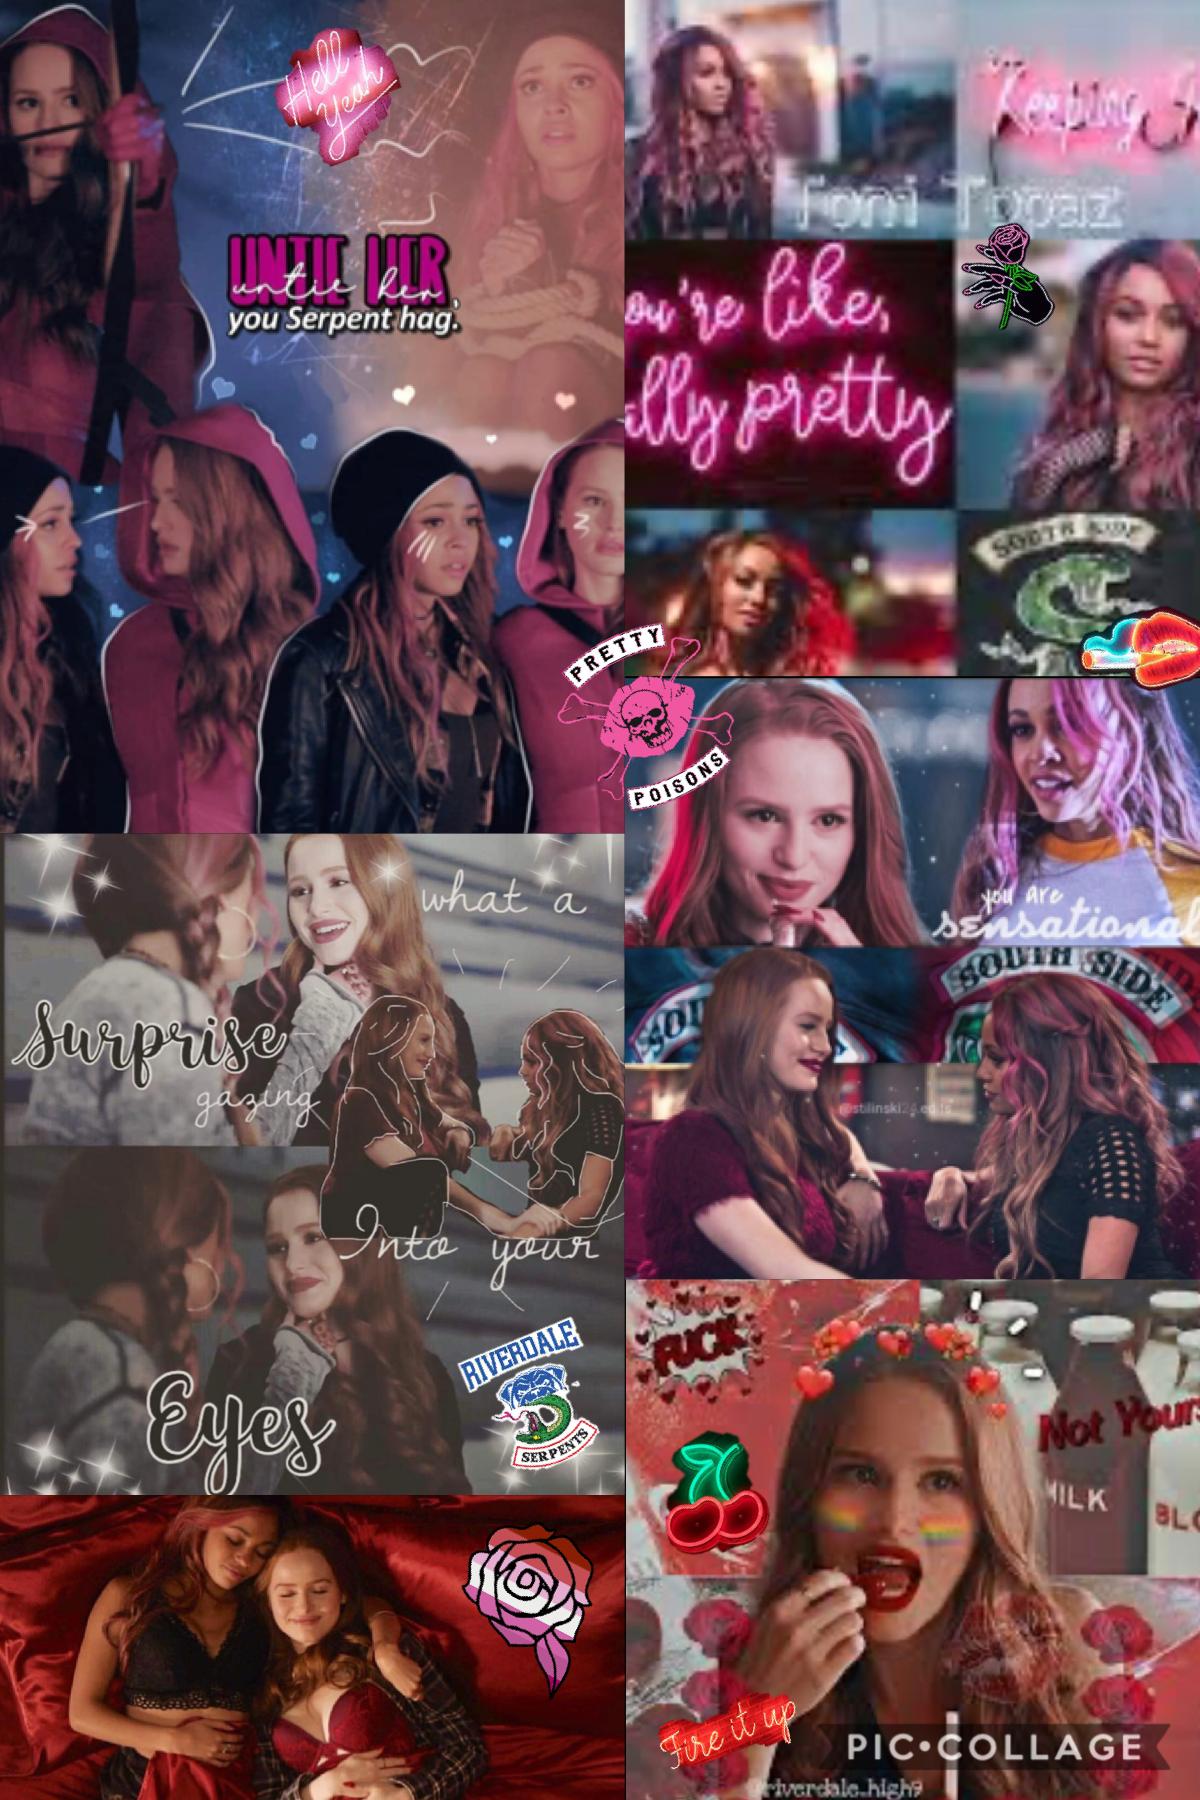 Choni is me and my girlfriend! 💕